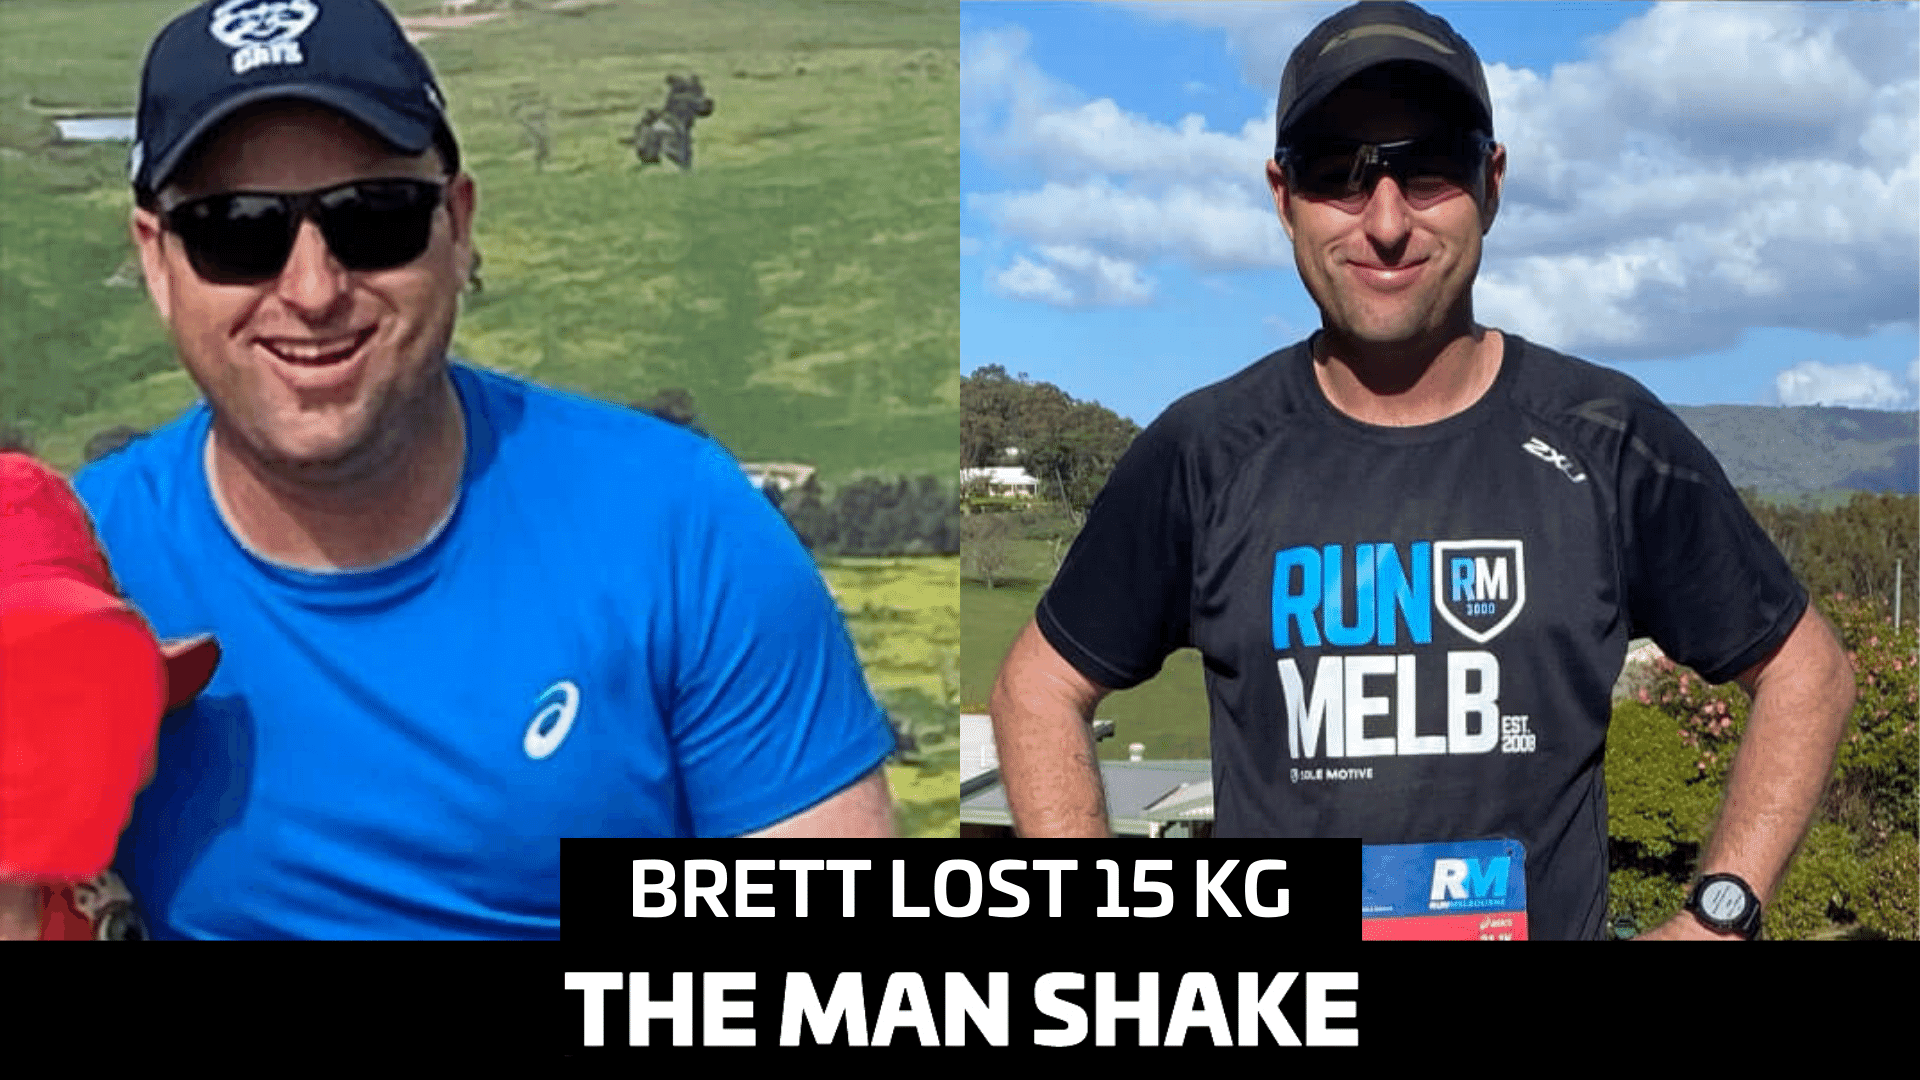 Brett lost 15kg and ditched the dad bod